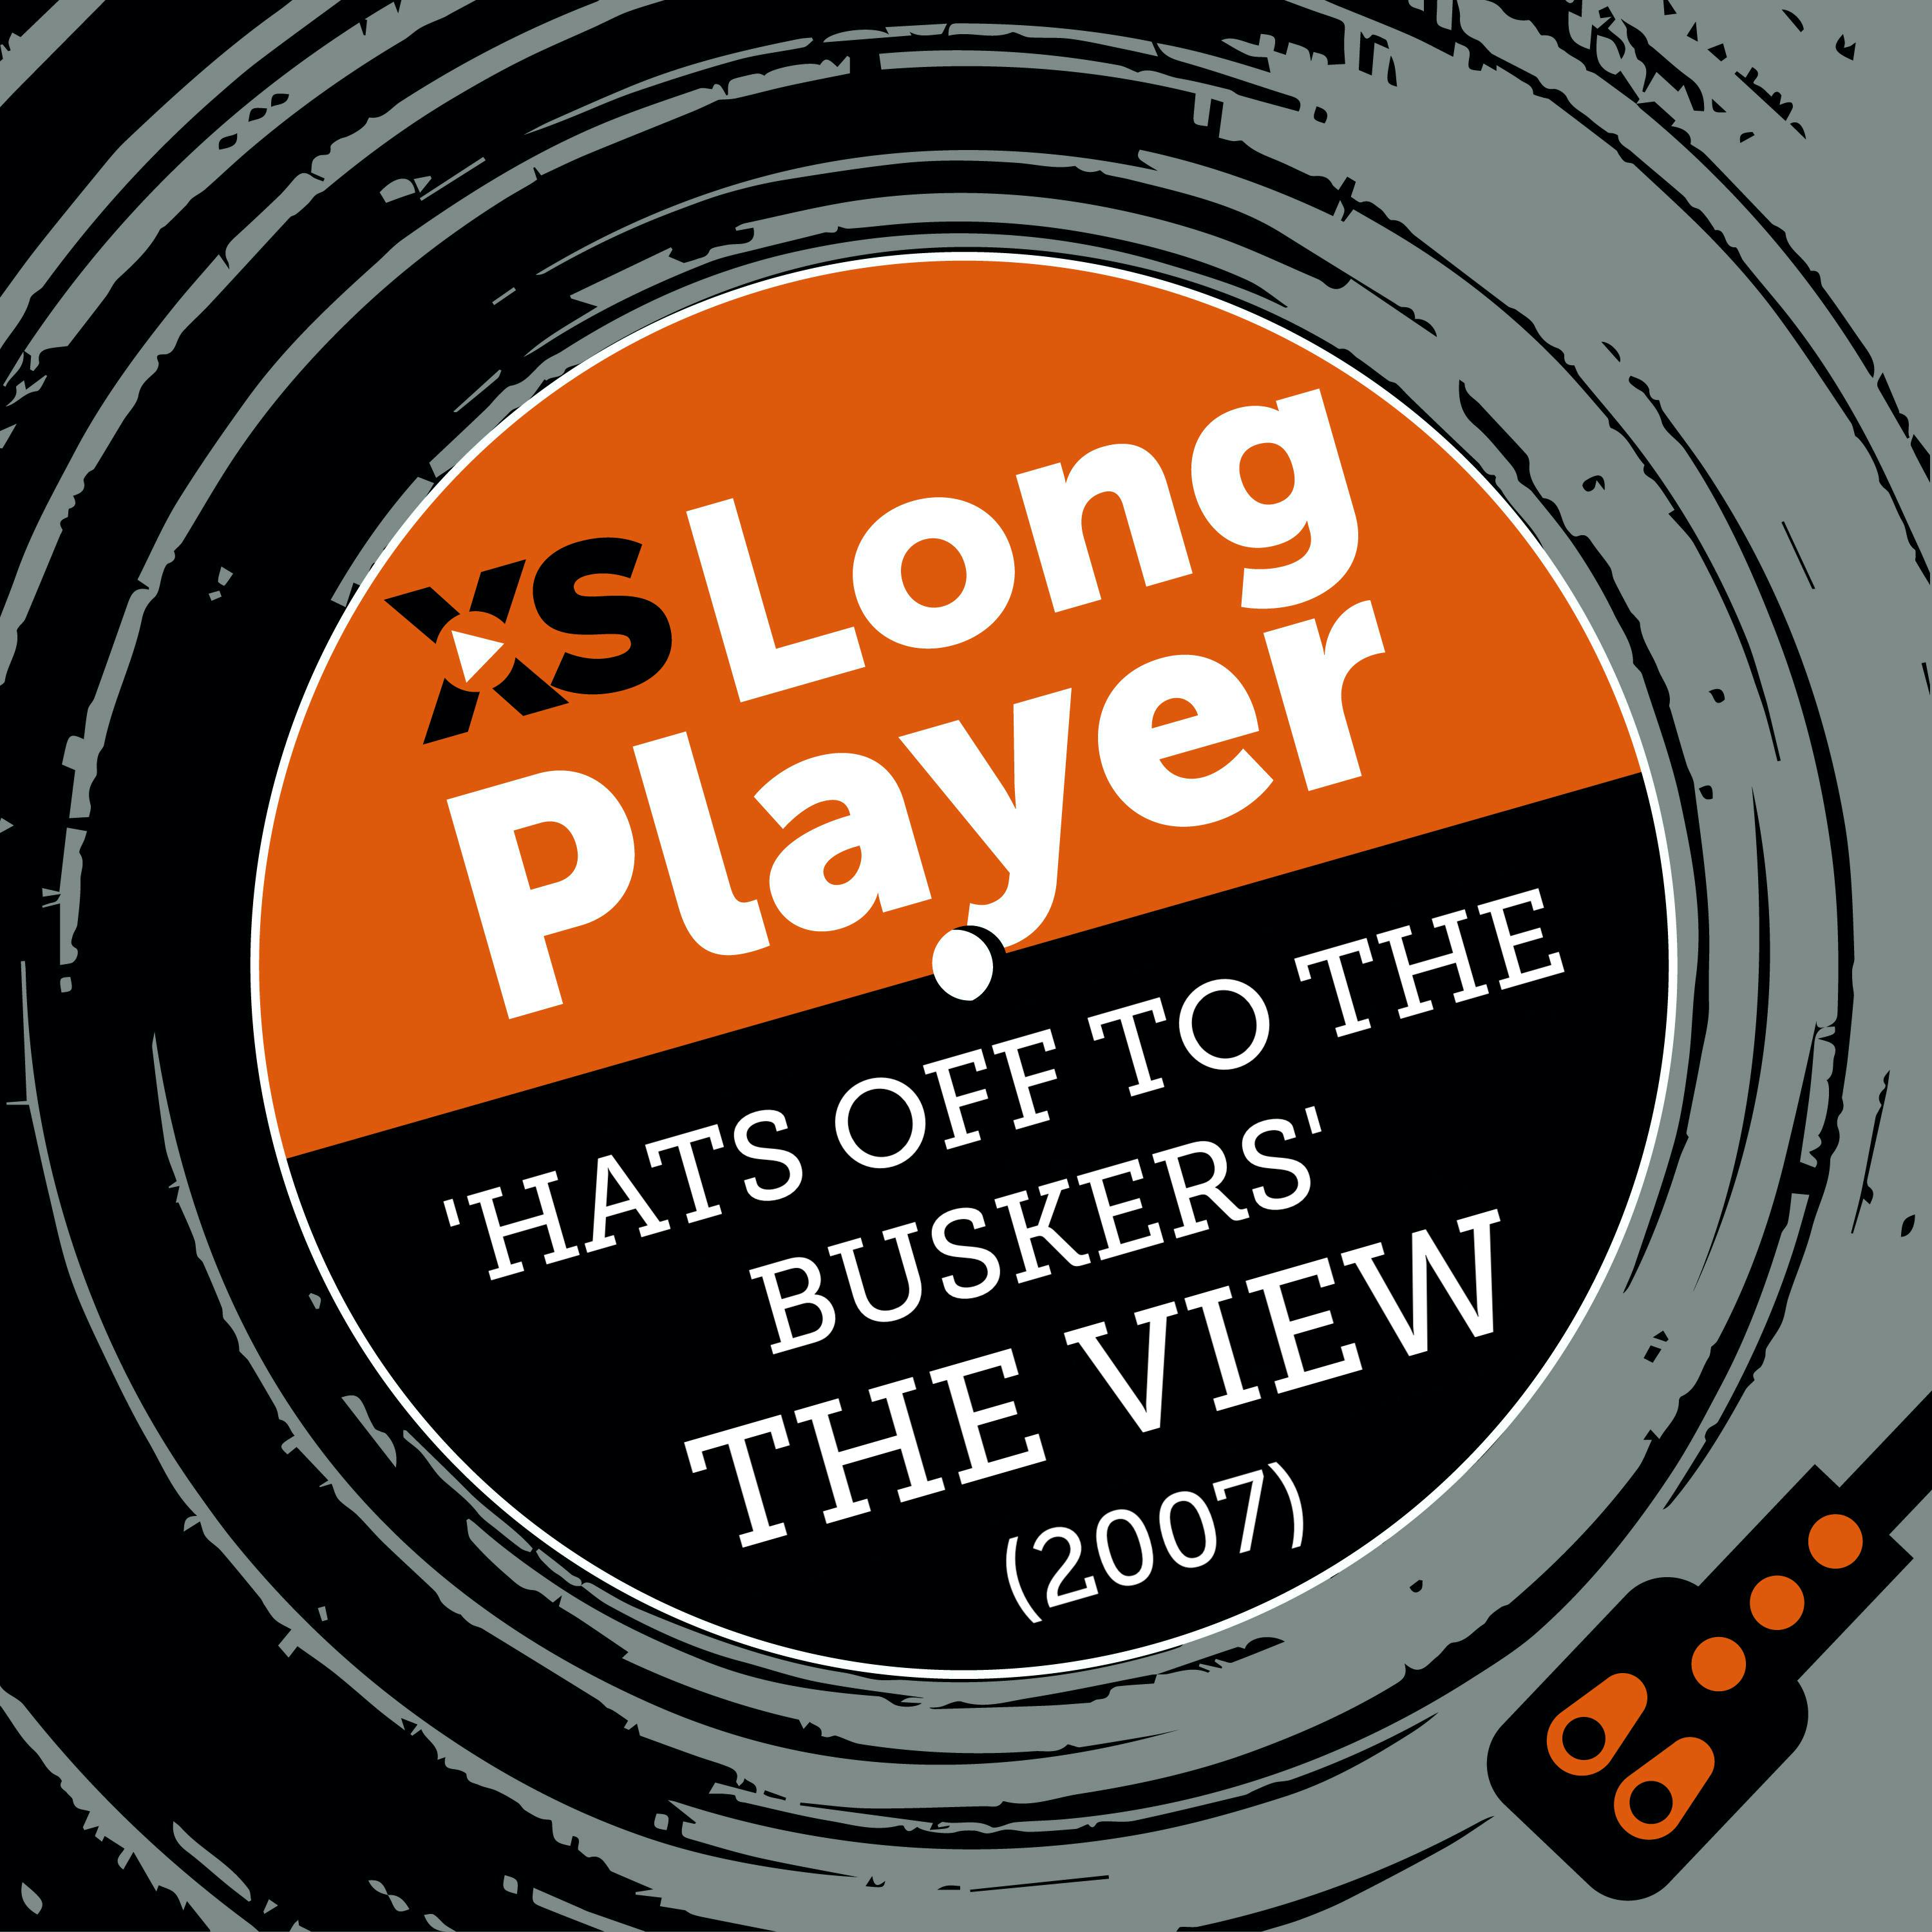 The View ”Hats Off To The Buskers” with Kyle Falconer